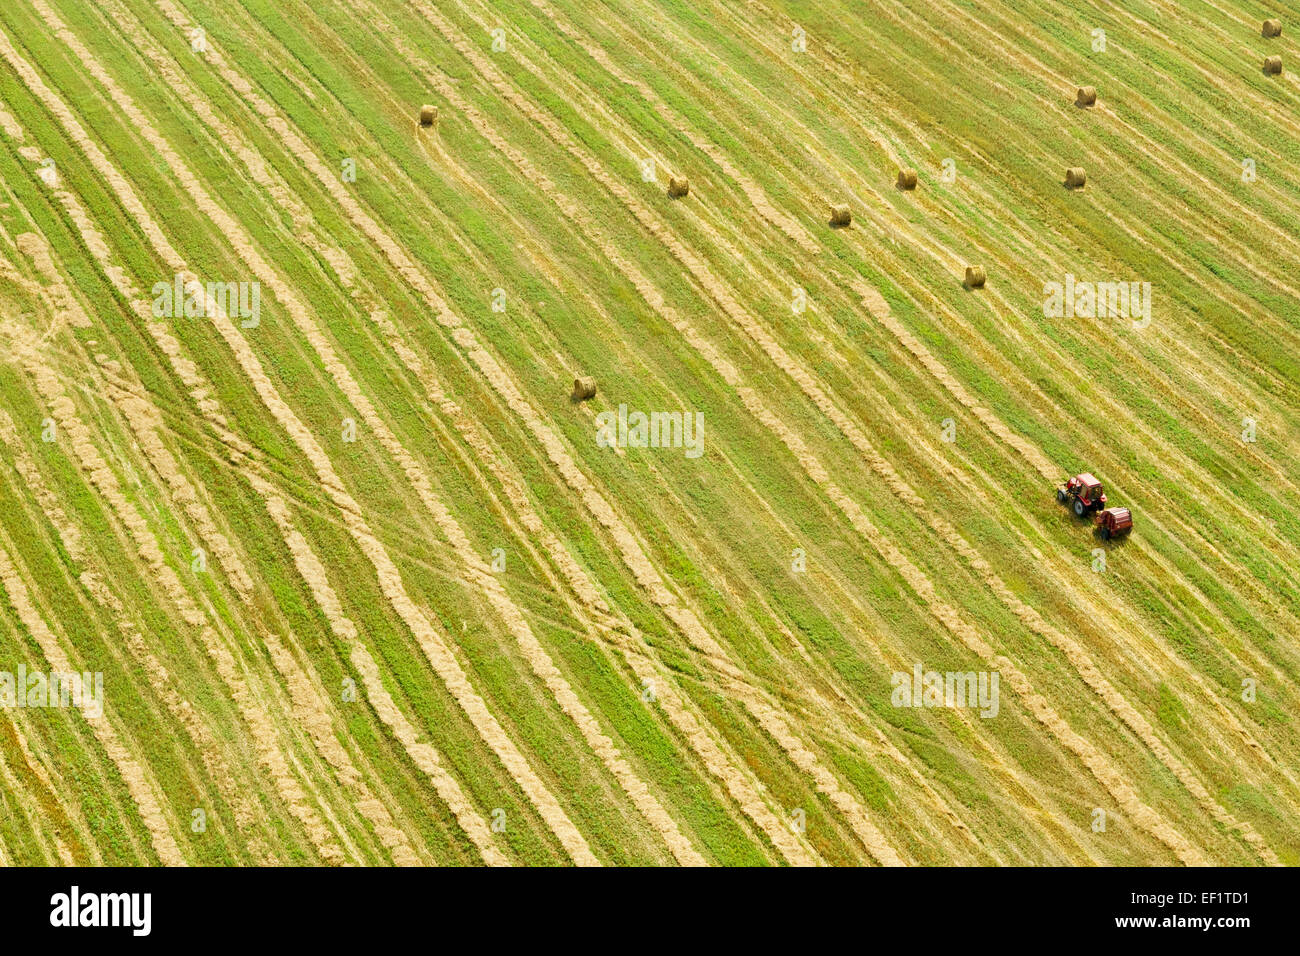 An aerial view of tractor working in summer field Stock Photo